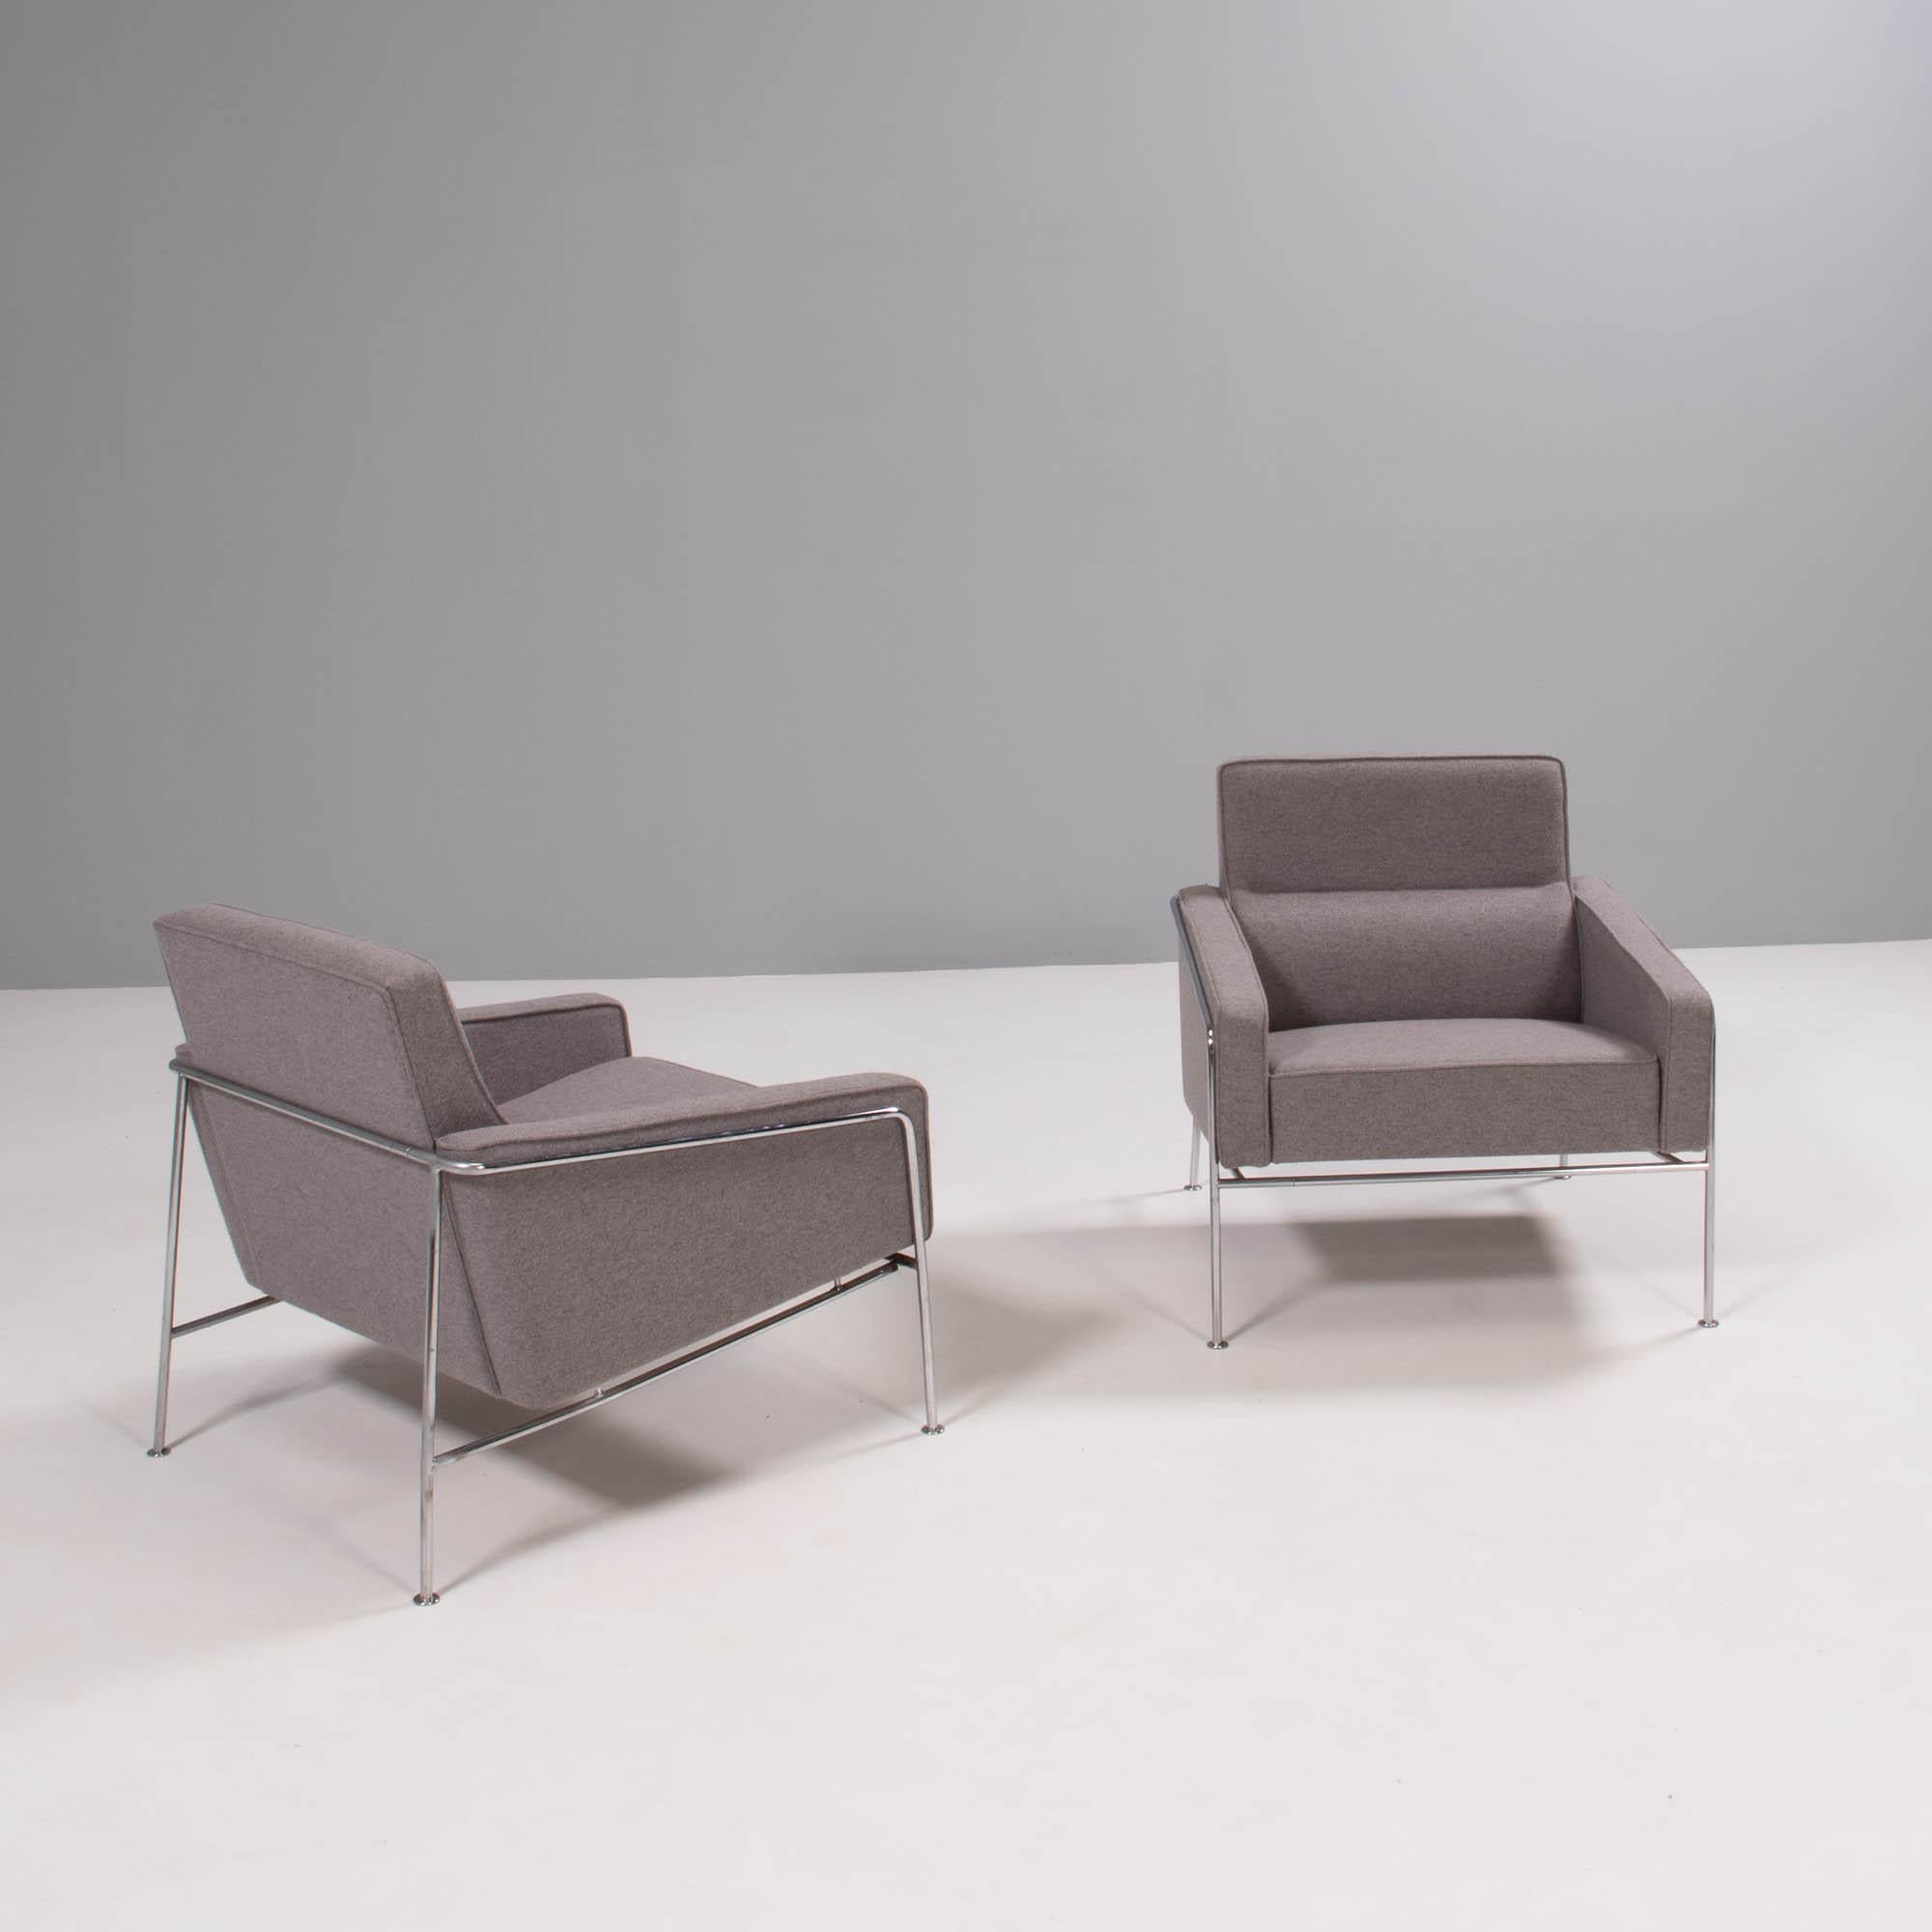 Originally designed by Arne Jacobsen for the SAS Air Terminal in Copenhagen, the Series 3300 chair has a futuristic aesthetic.

Featuring a slim tubular chrome frame, the chairs are upholstered in grey fabric with angular armrests and a padded